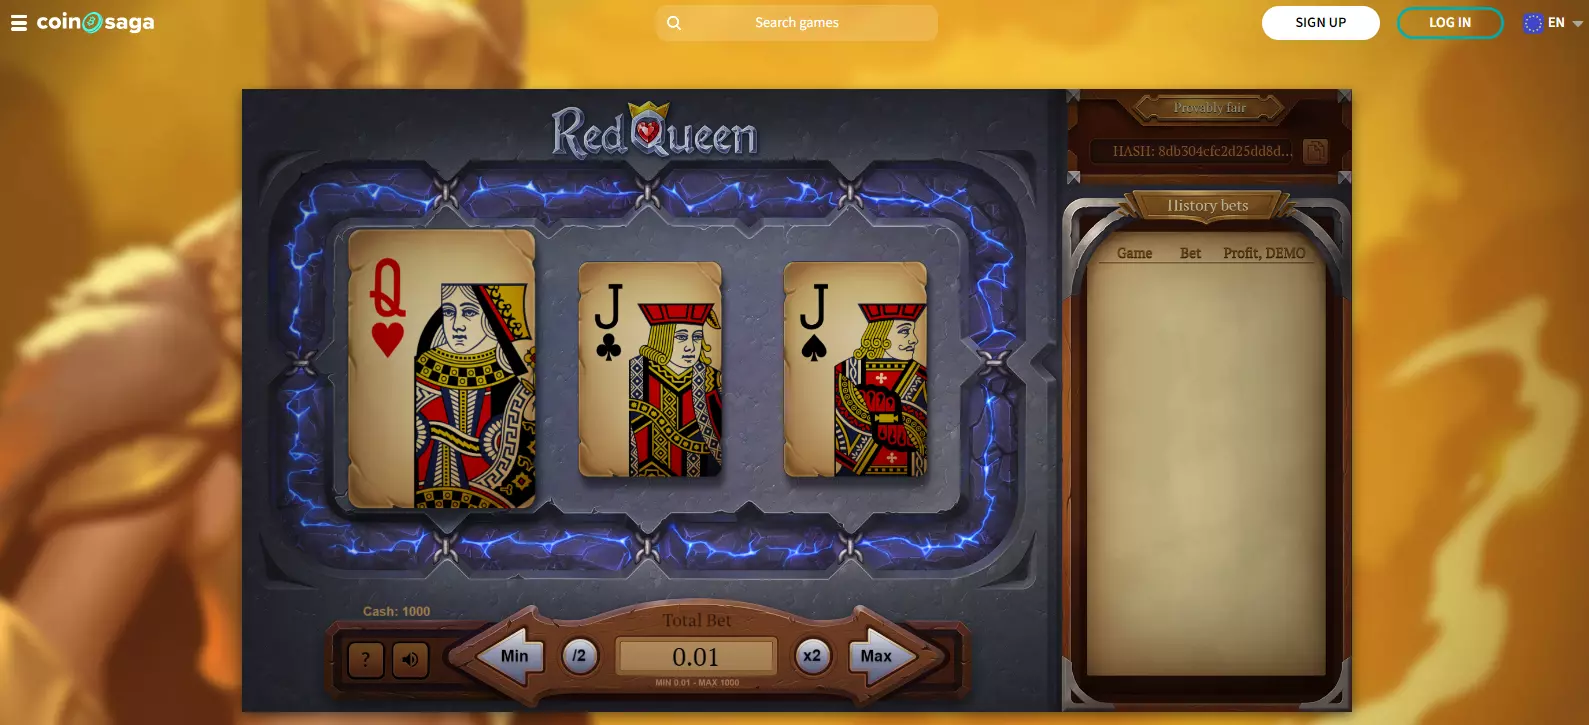 Red Queen Casino Game review